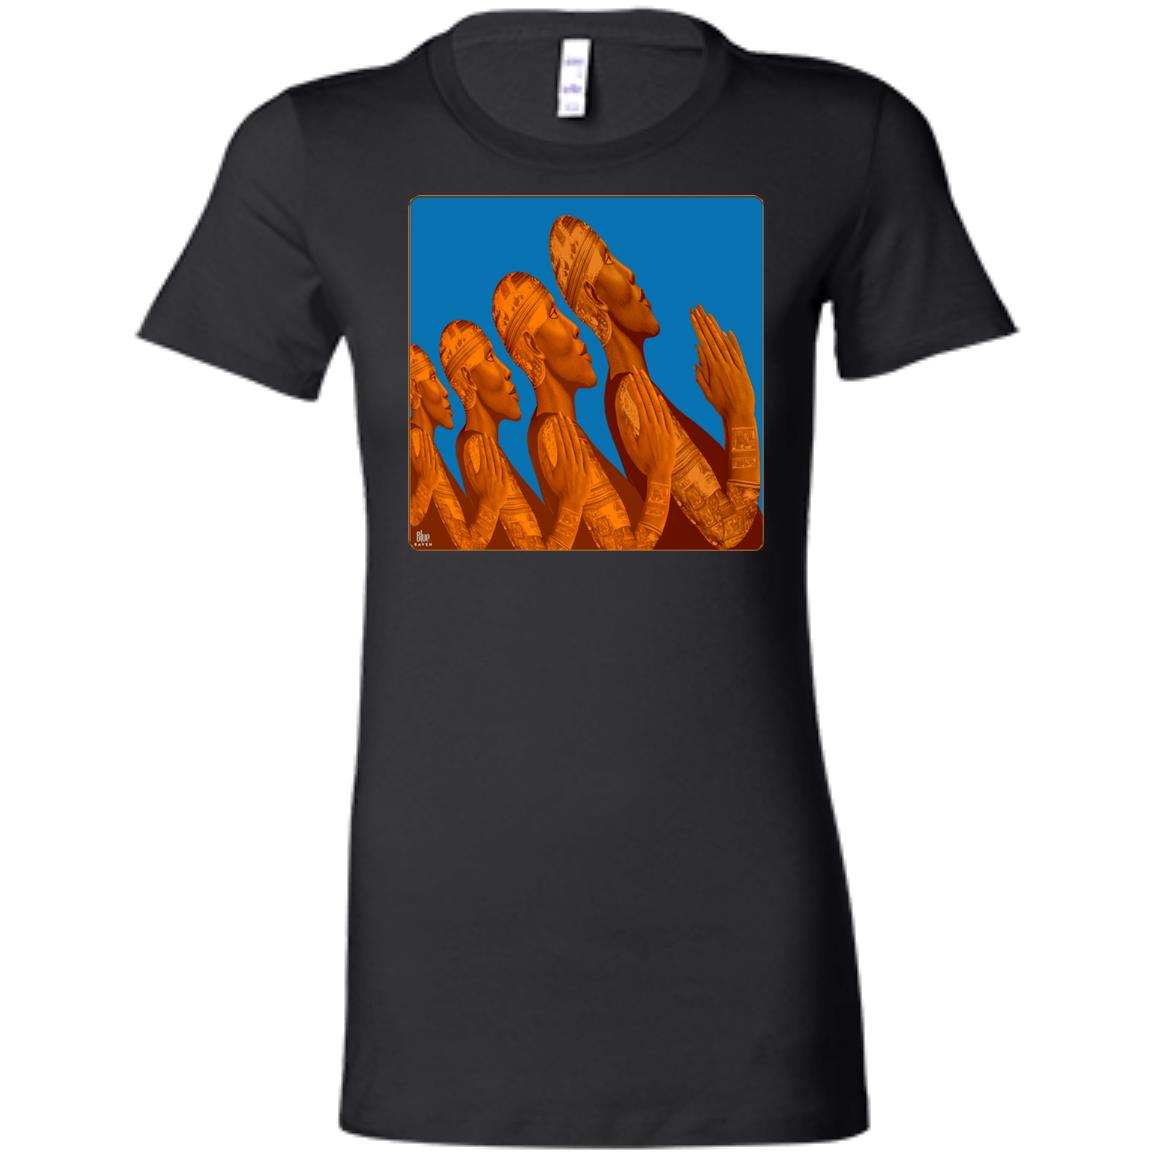 EMERGENCE - Women's Fitted T-Shirt